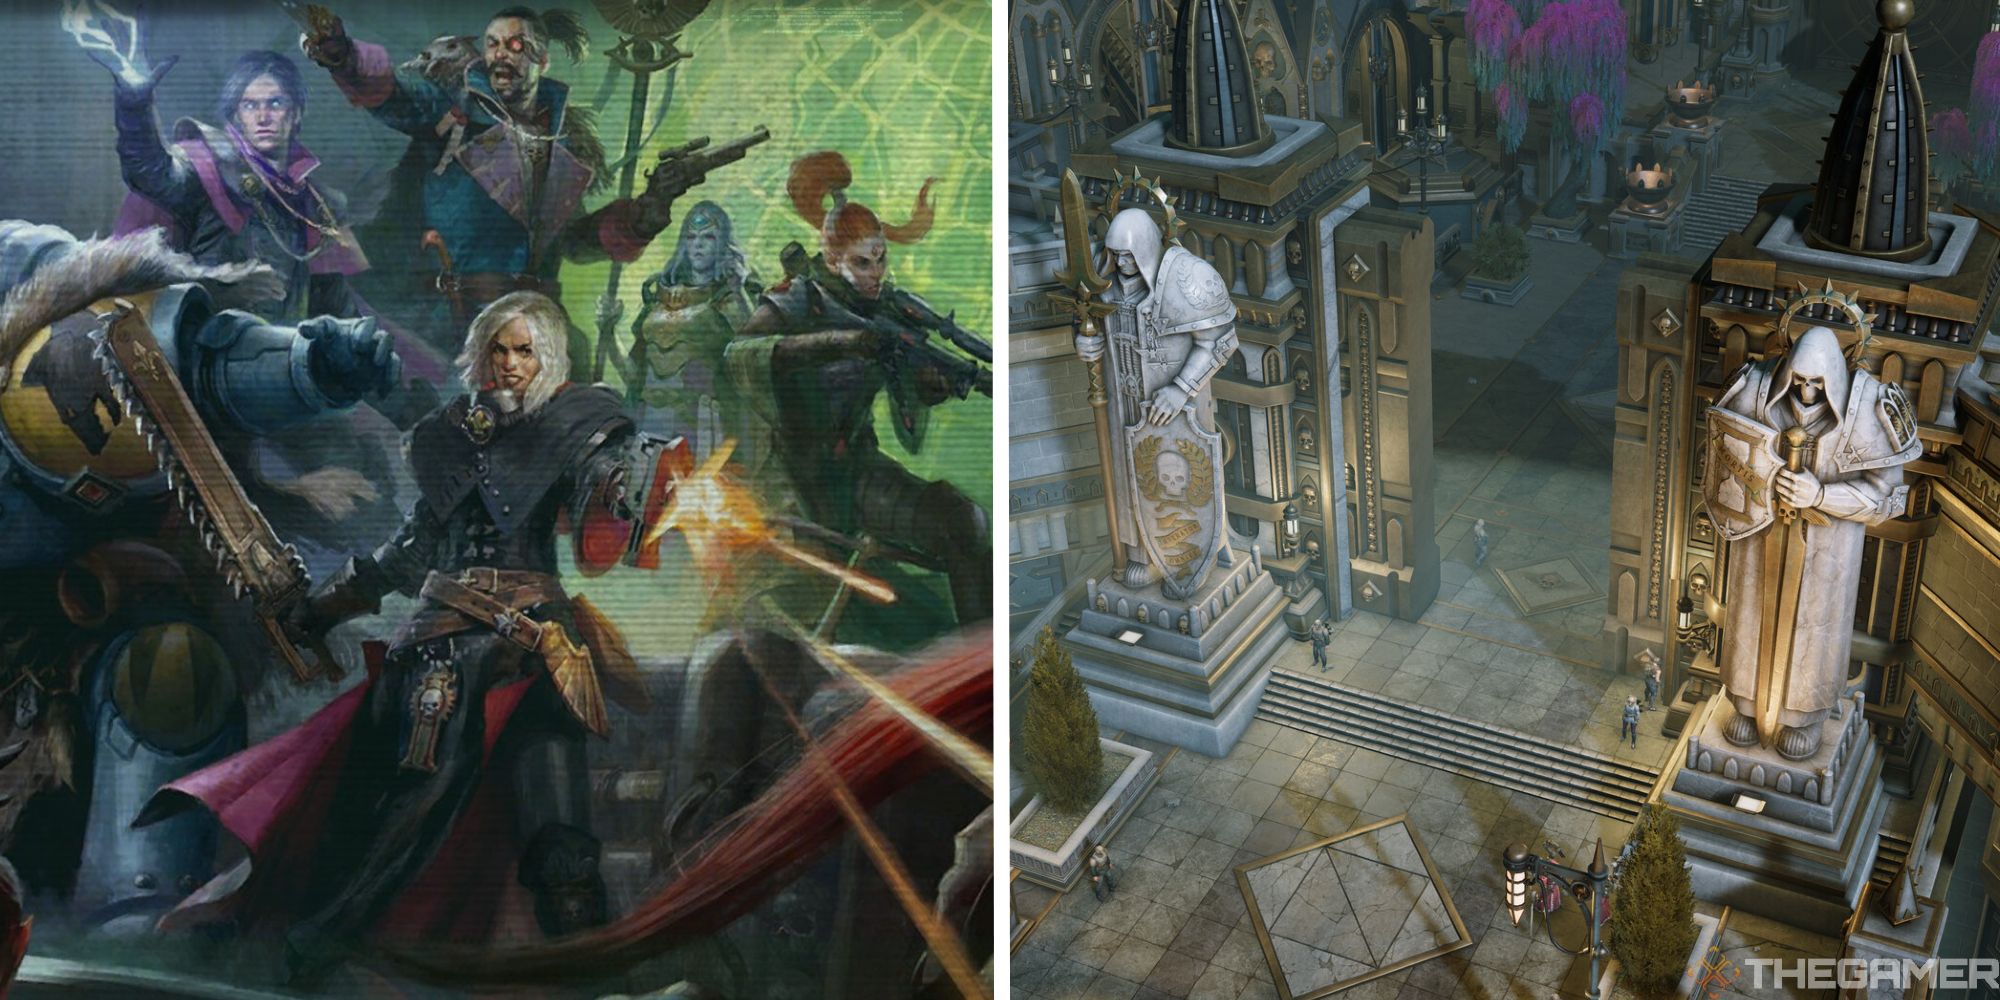 warhammer split image showing official party art next to image of path with two statues on either side from above